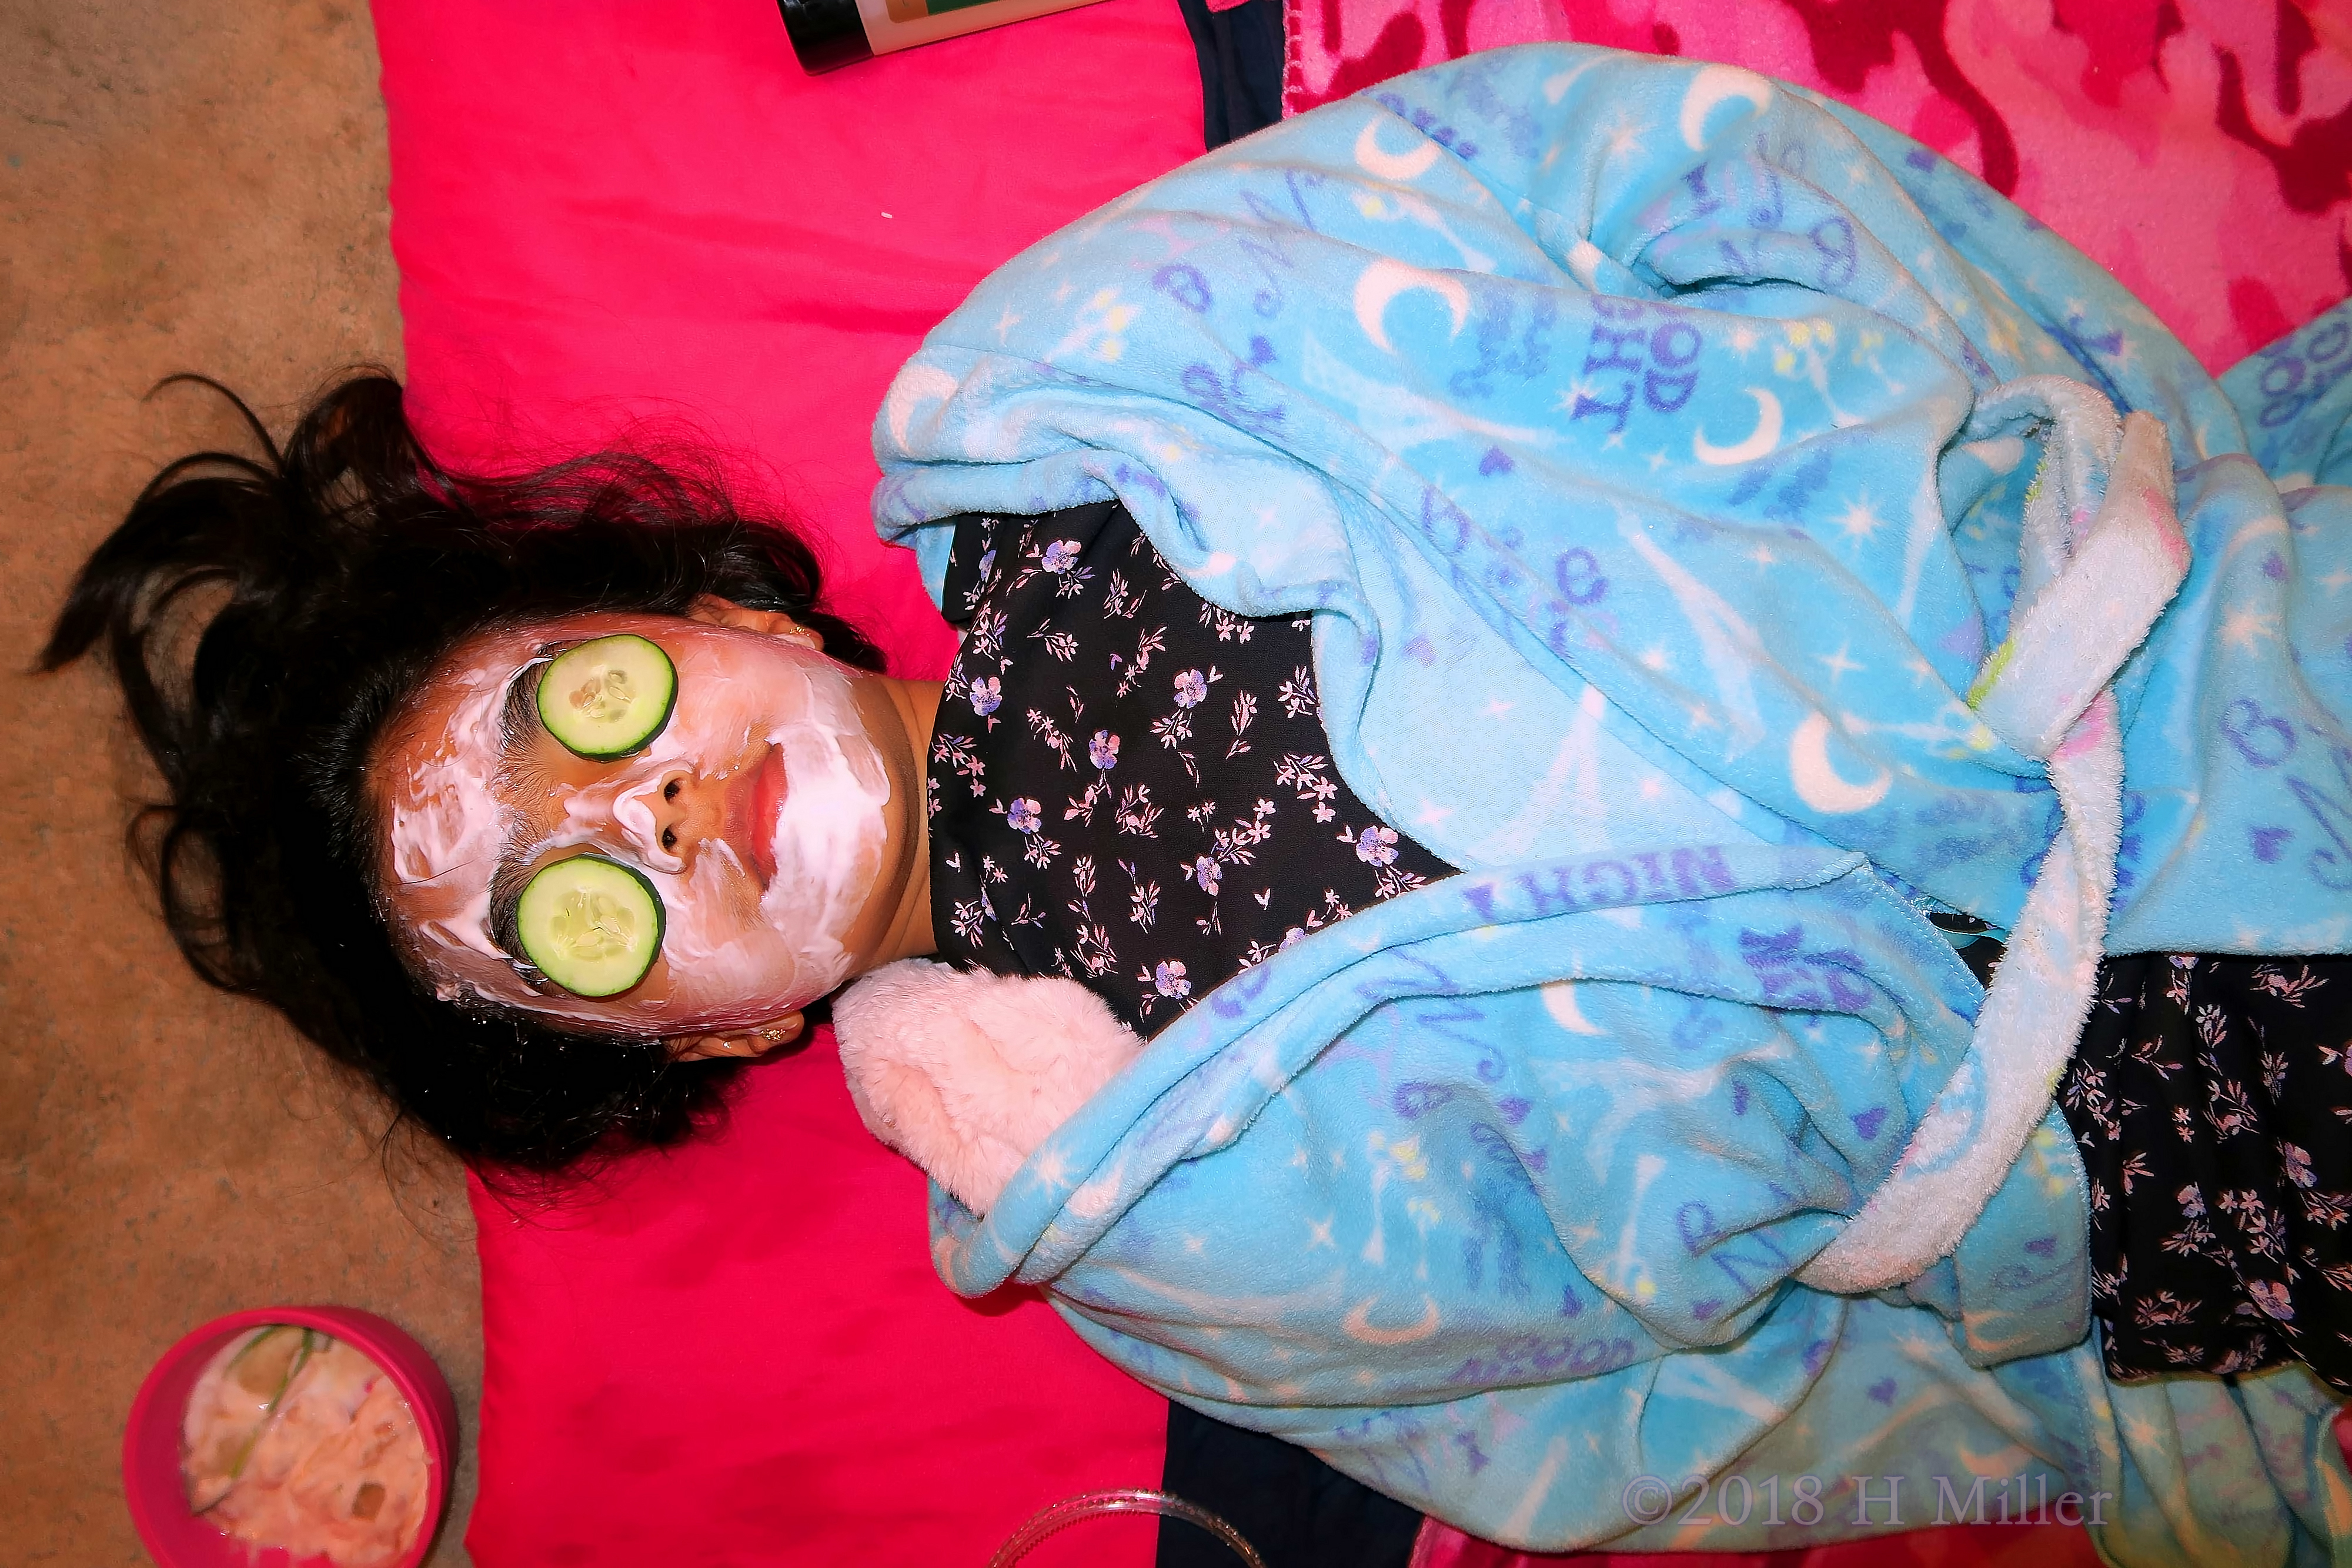 With Cukes Over Her Eyes And The Girls Facial Masque, She Relaxes! 